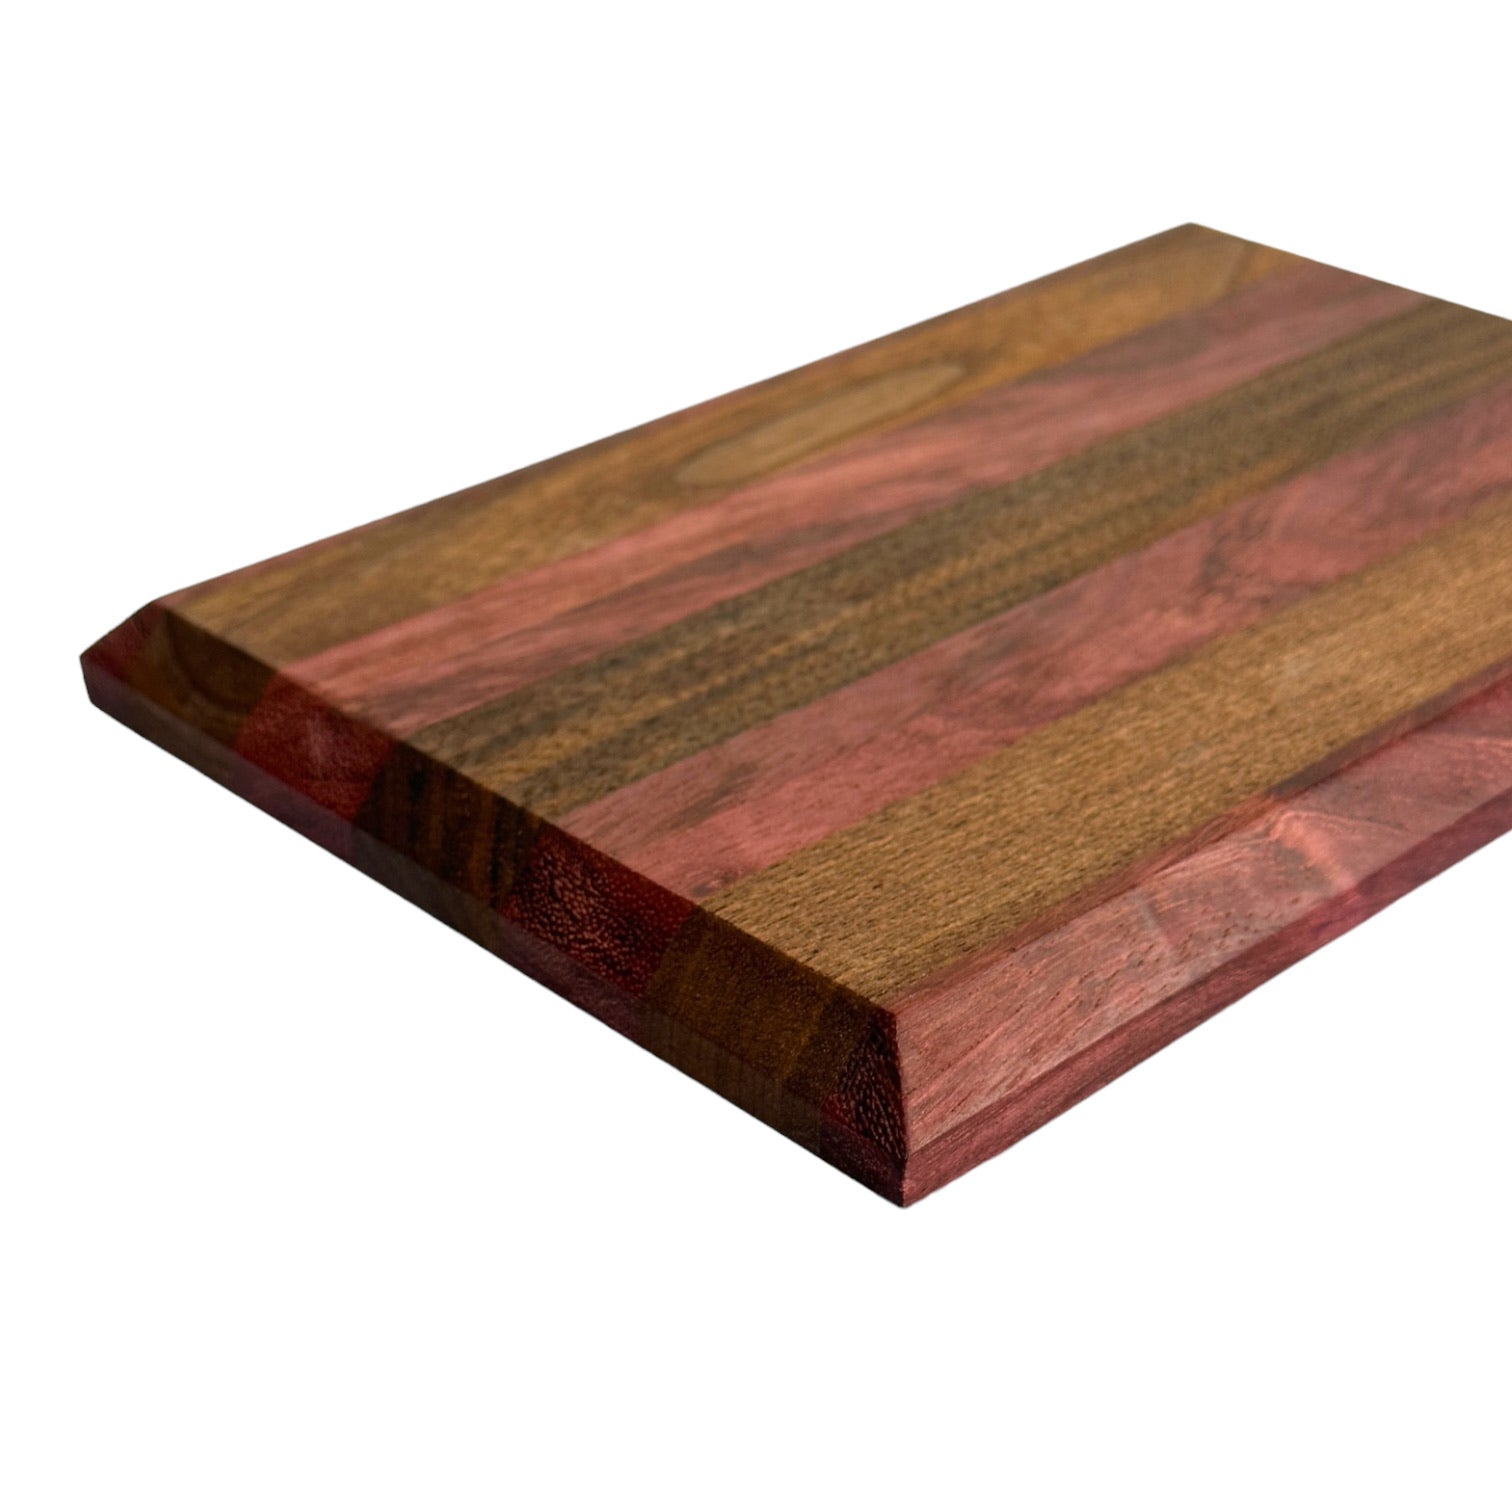 Exotic Mini Wood Cutting Boards - RTS walnut and putple heart bottom view